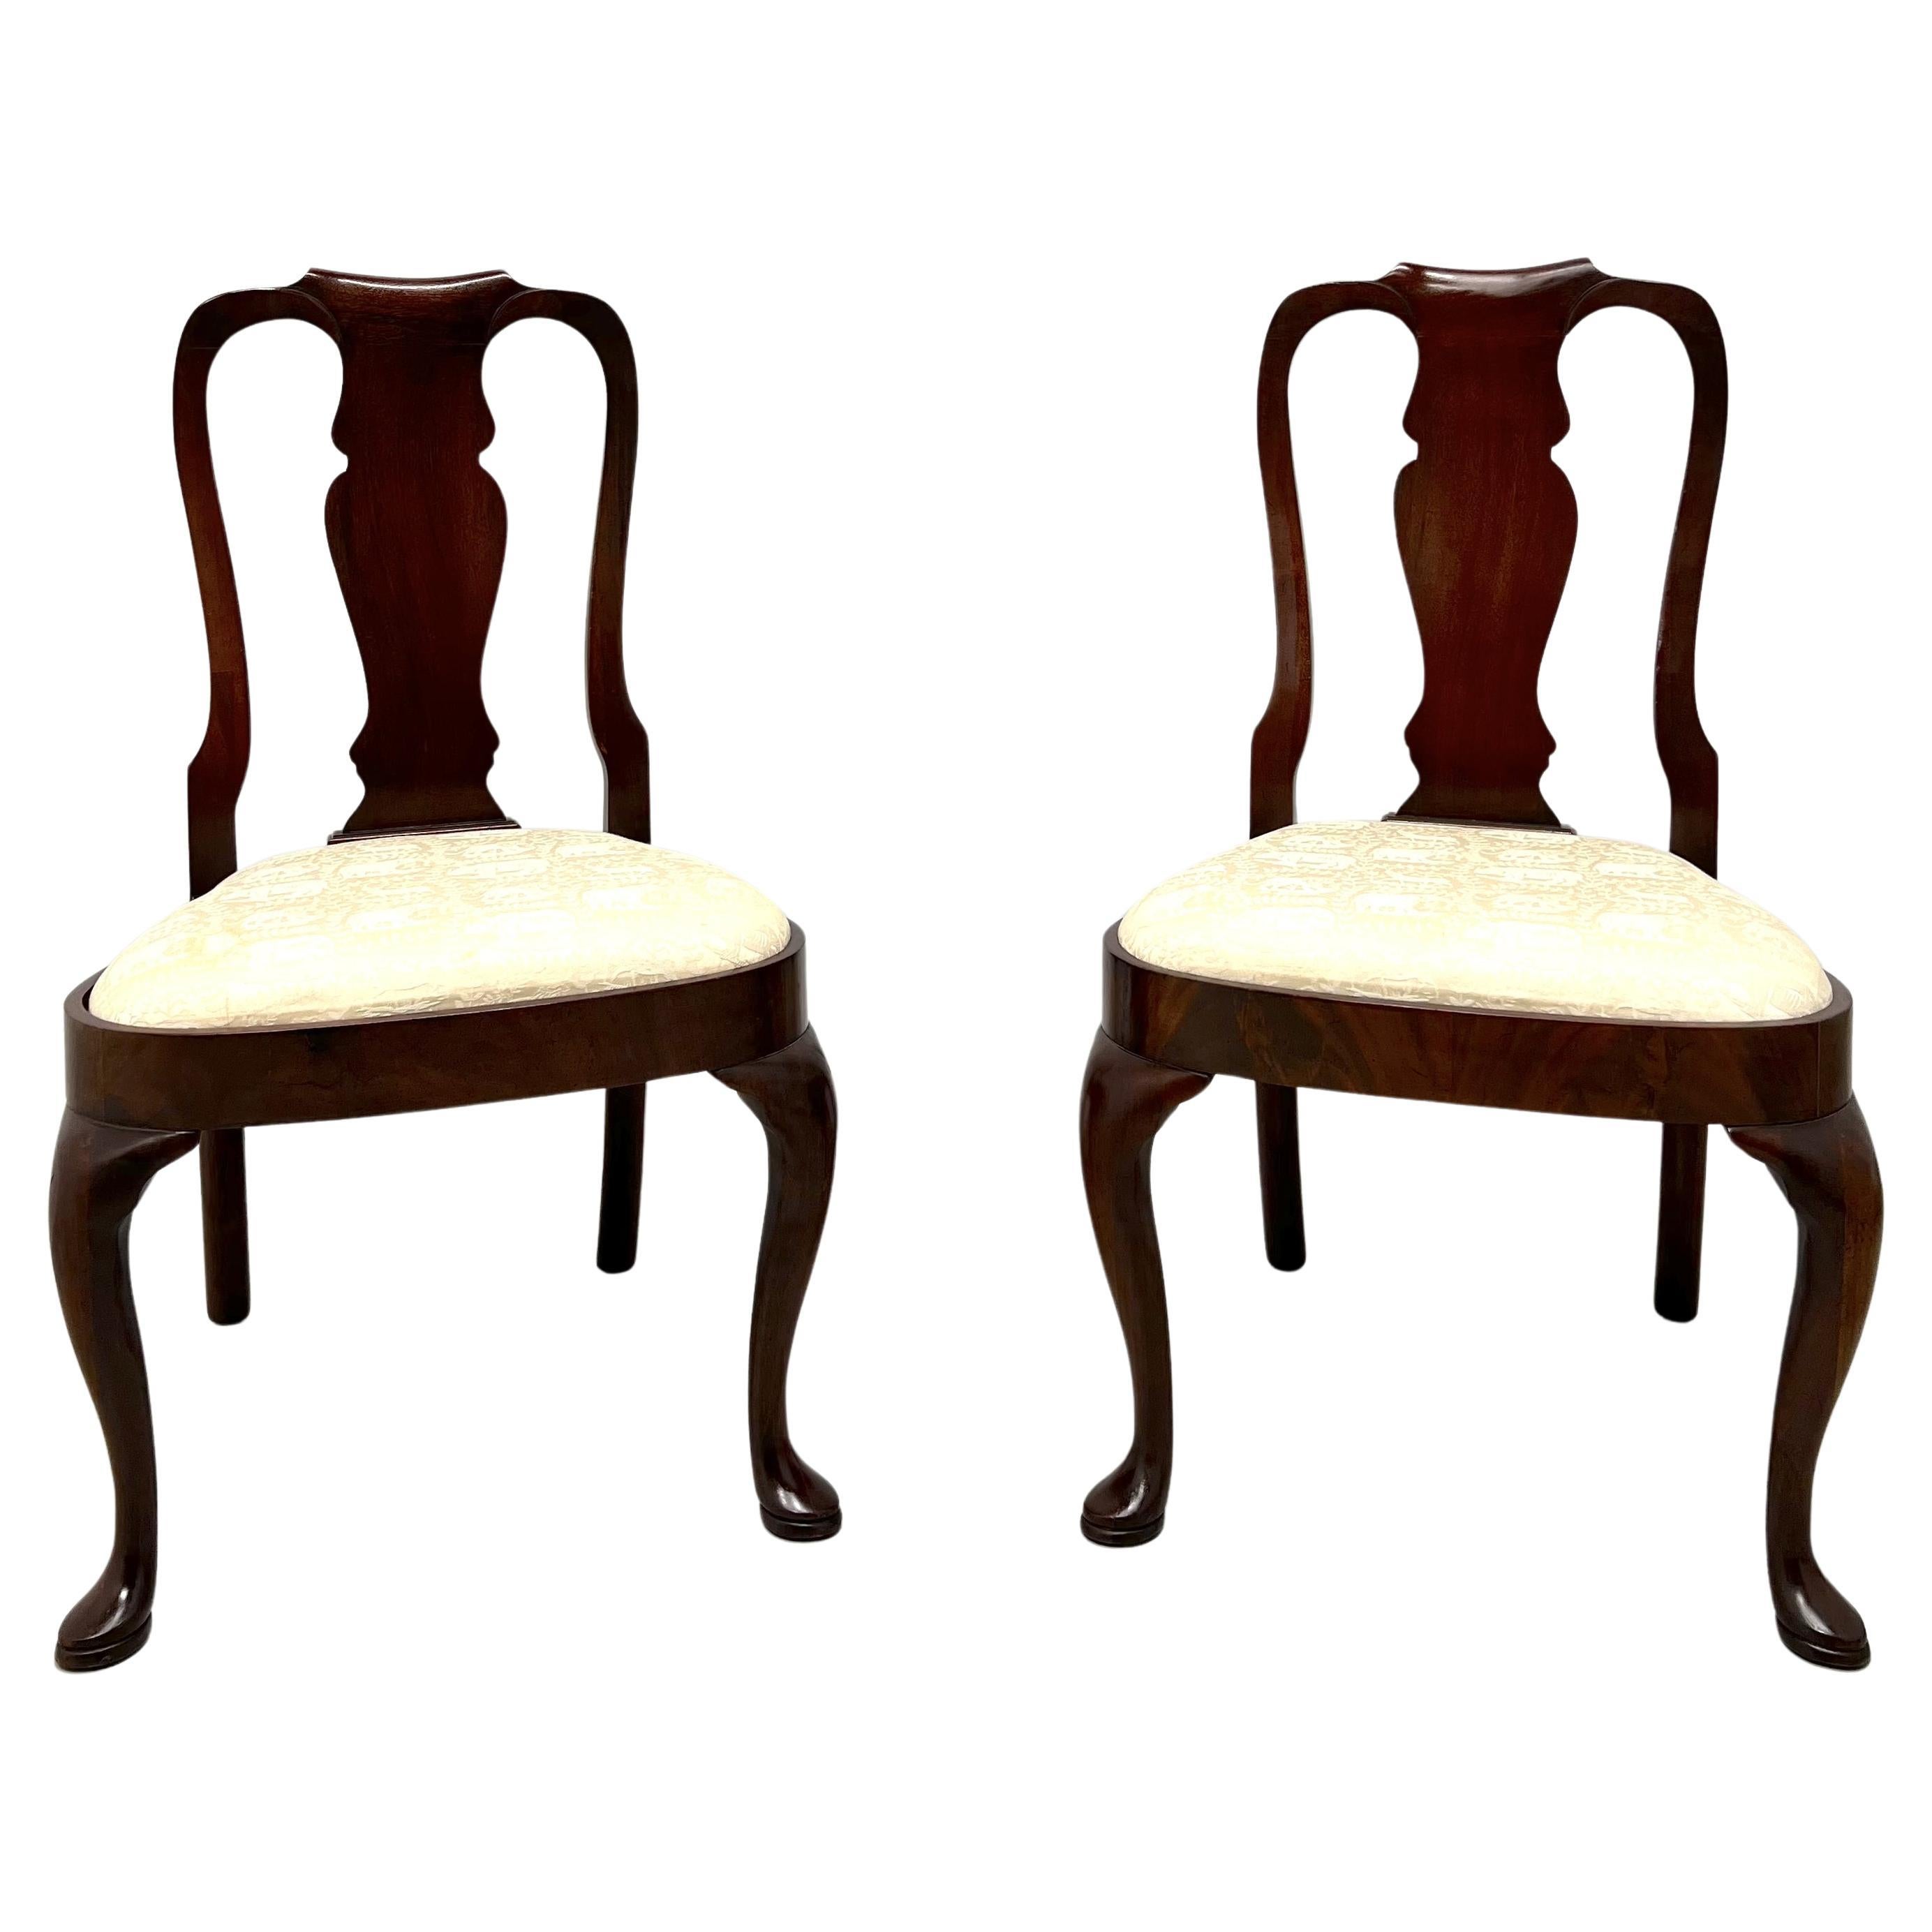 Hickory Chair Furniture Company Dining Room Chairs